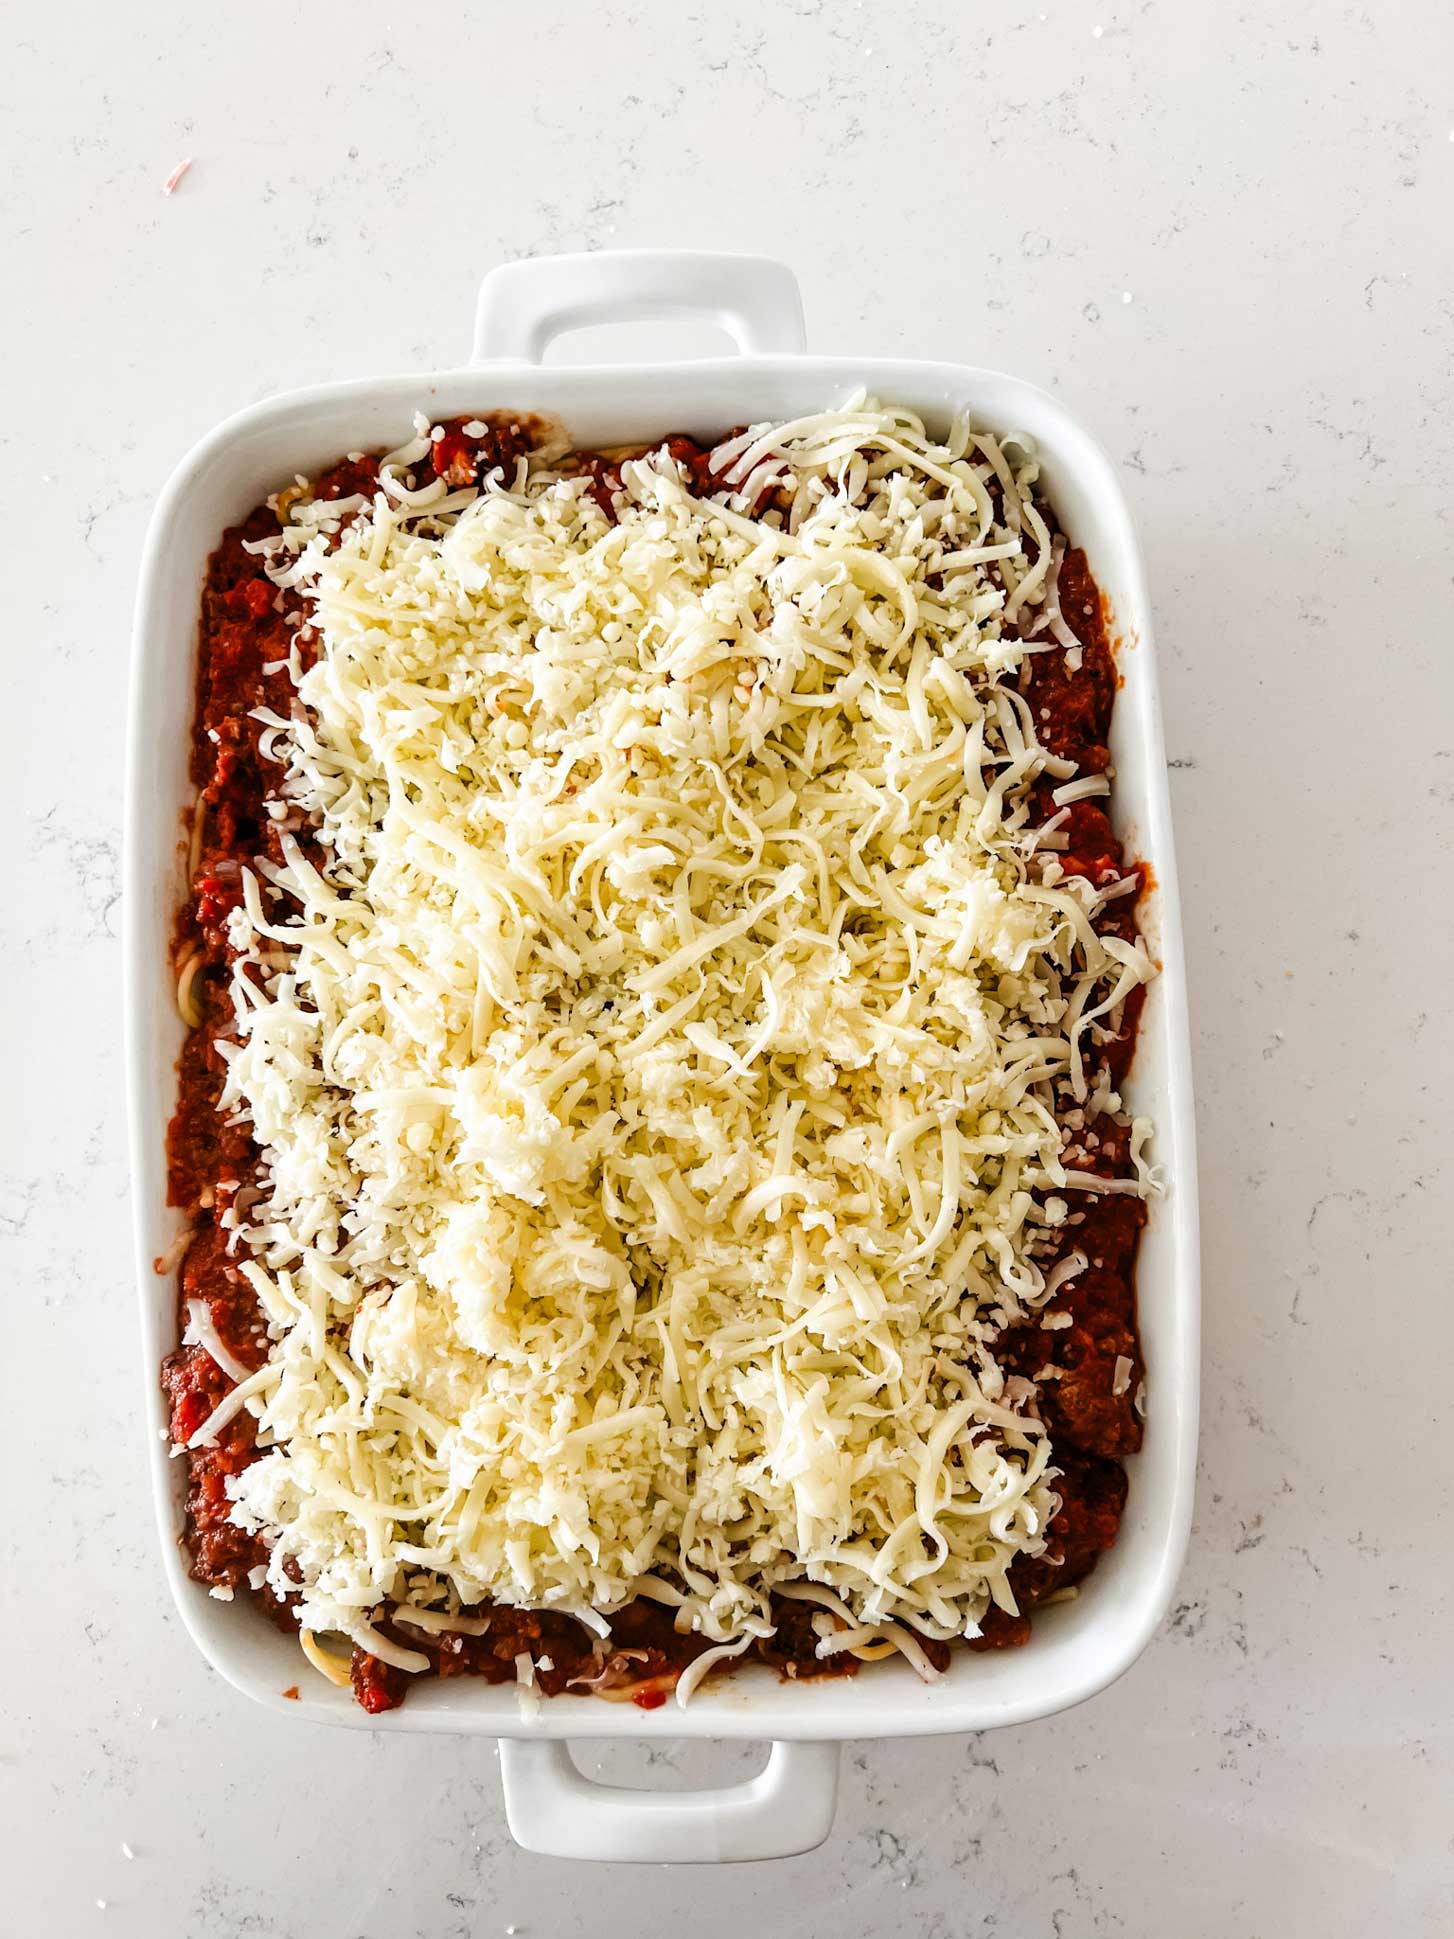 A baked spaghetti casserole ready for the oven.